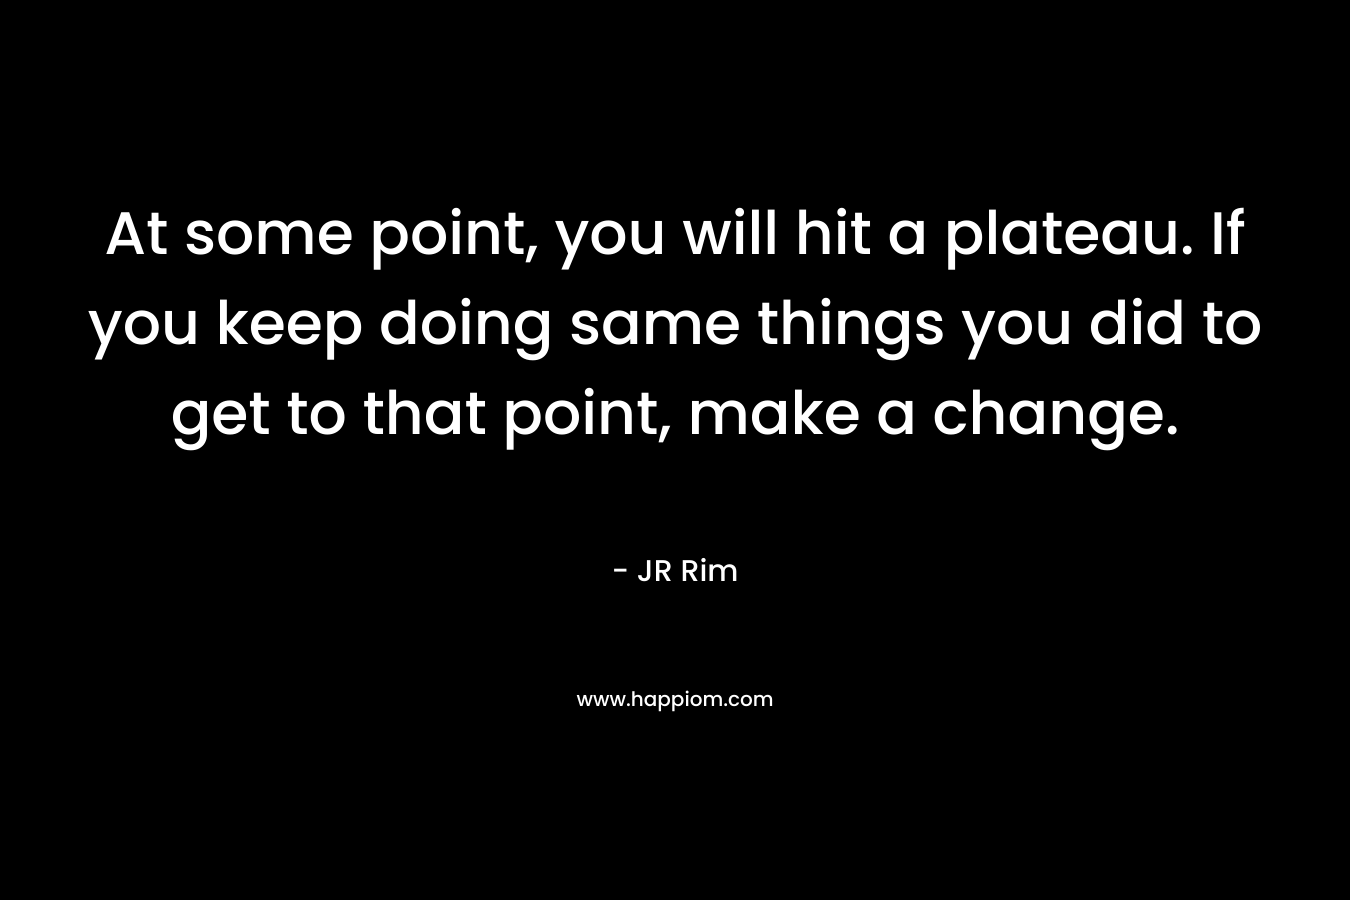 At some point, you will hit a plateau. If you keep doing same things you did to get to that point, make a change. – JR Rim